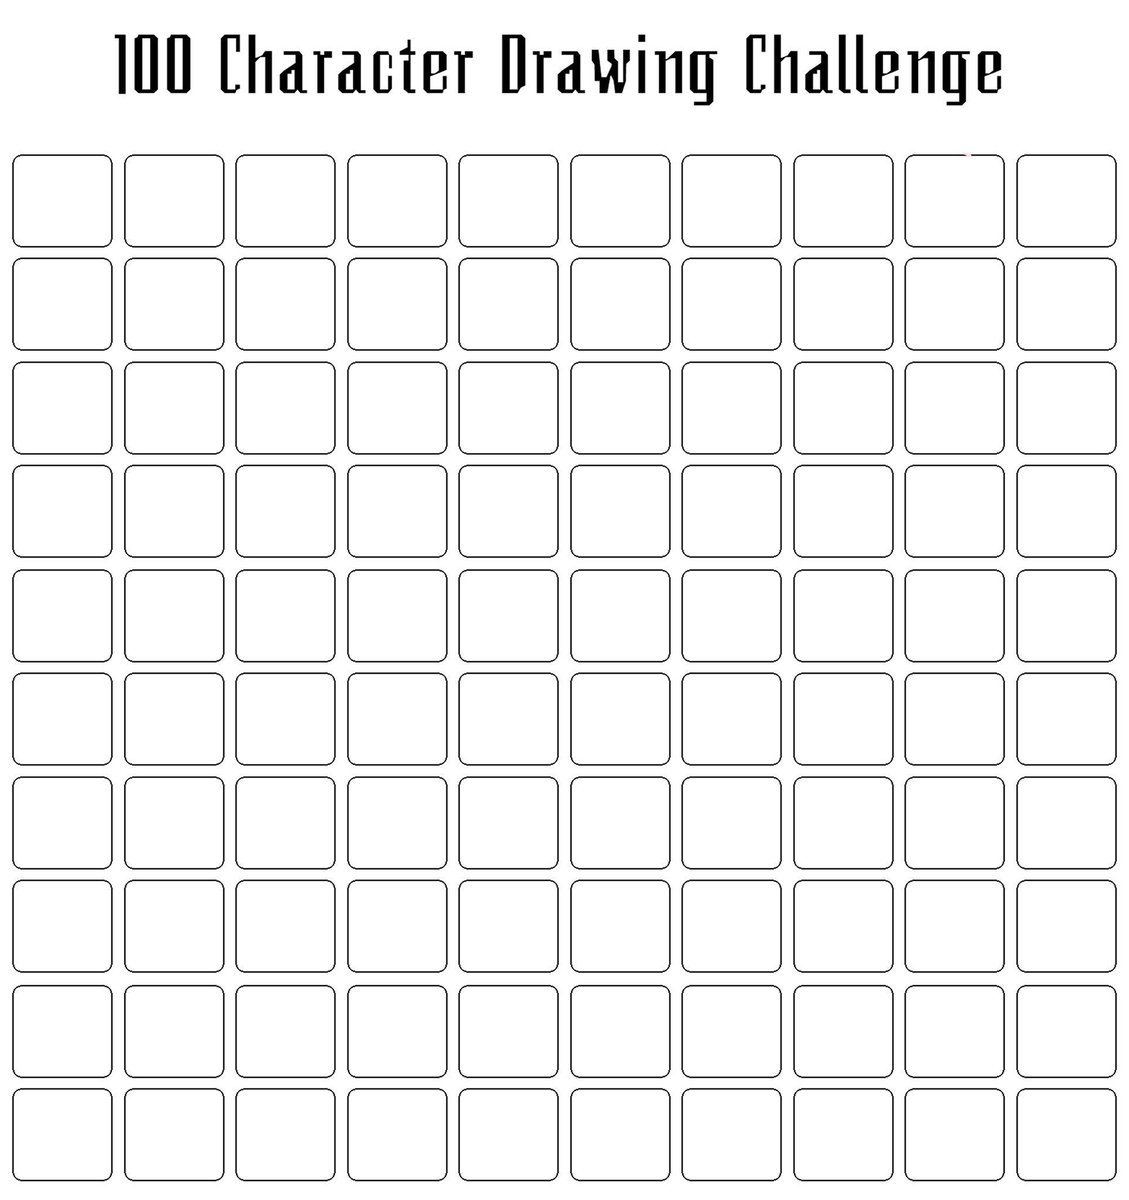 Here we go. I doubt I'll get 100 so I'll just do how many people reply (only head shots because I still suck rn)